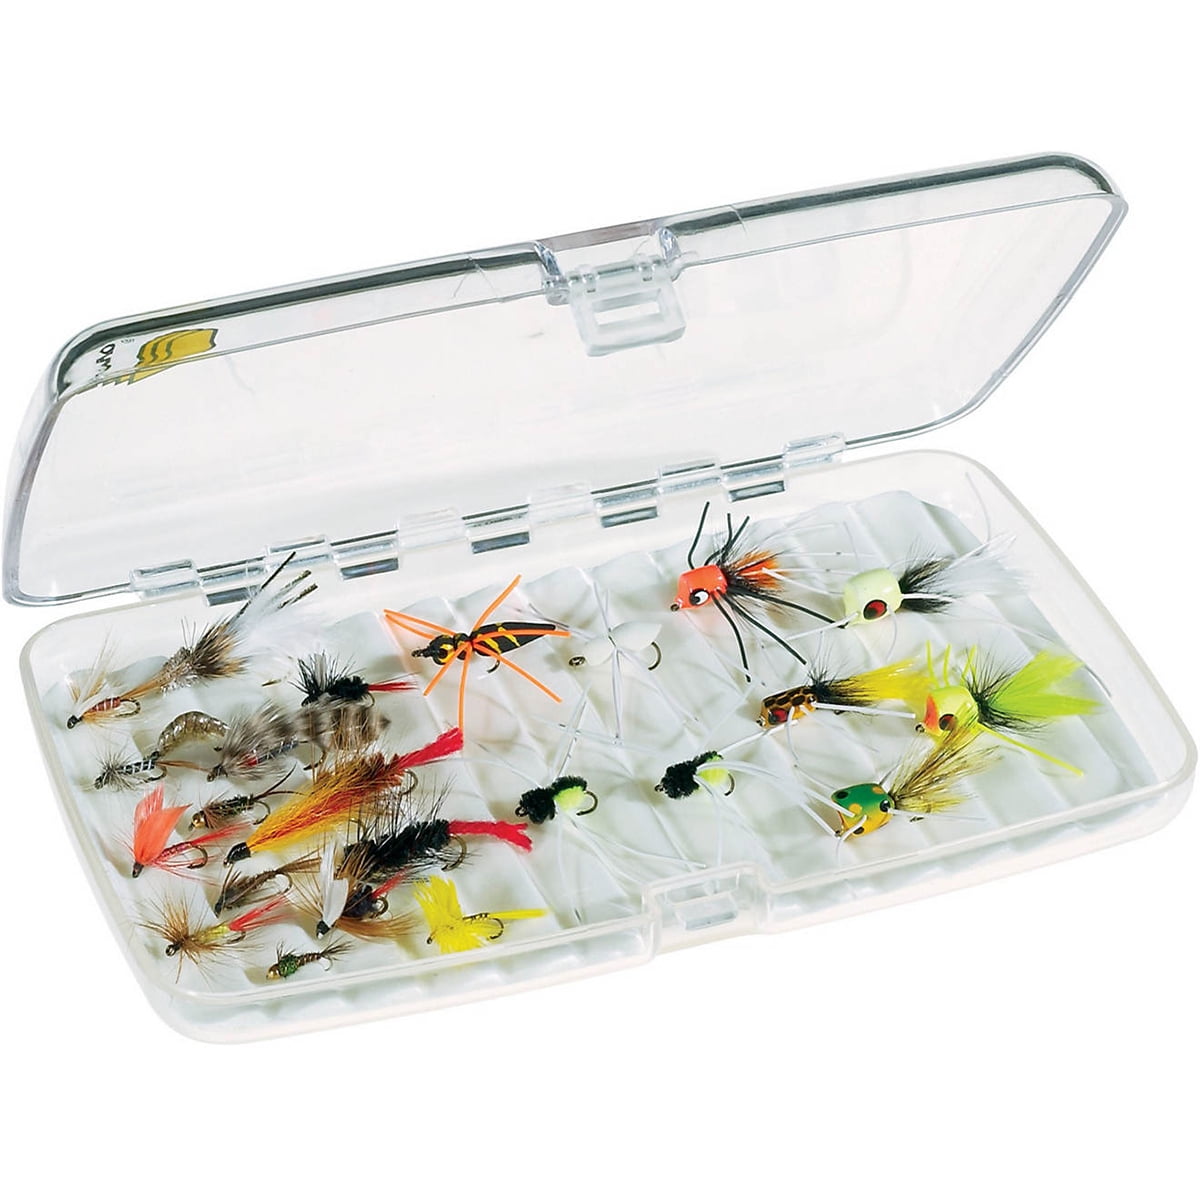 Plano Synergy Guide Series Fly Fishing Fly Box, Large, Clear